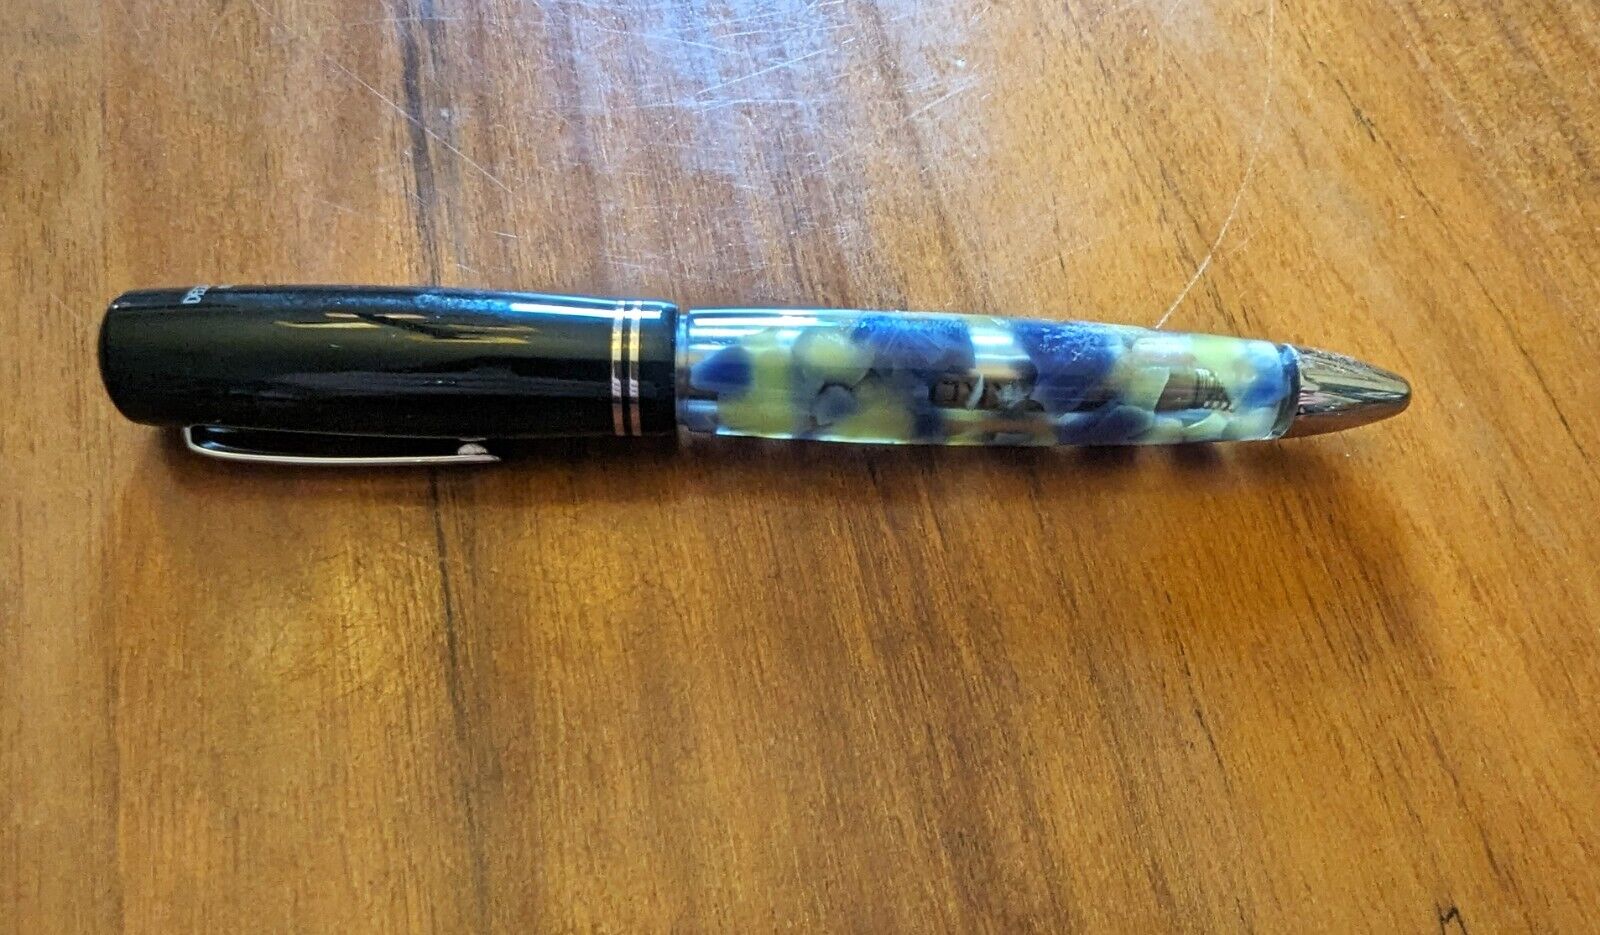 Delta Ballpoint Pen Model 366 in Blue and Green, Made in Italy